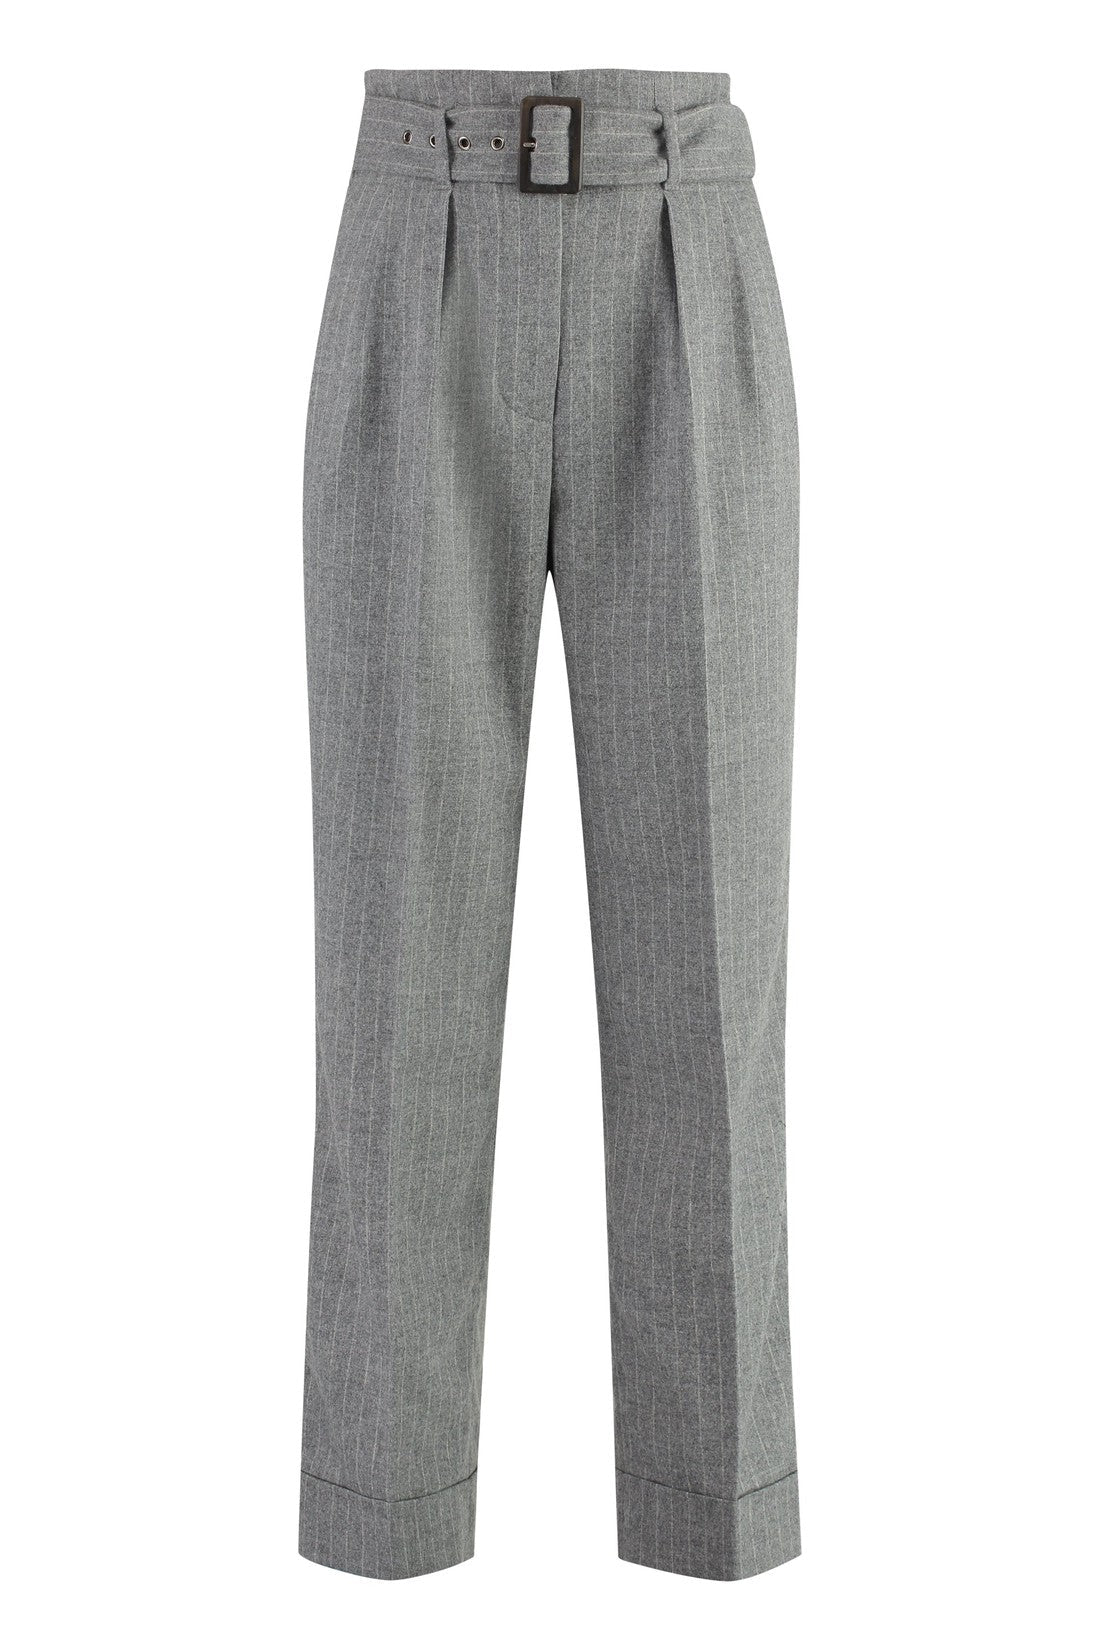 Peserico-OUTLET-SALE-Wool blend trousers-ARCHIVIST